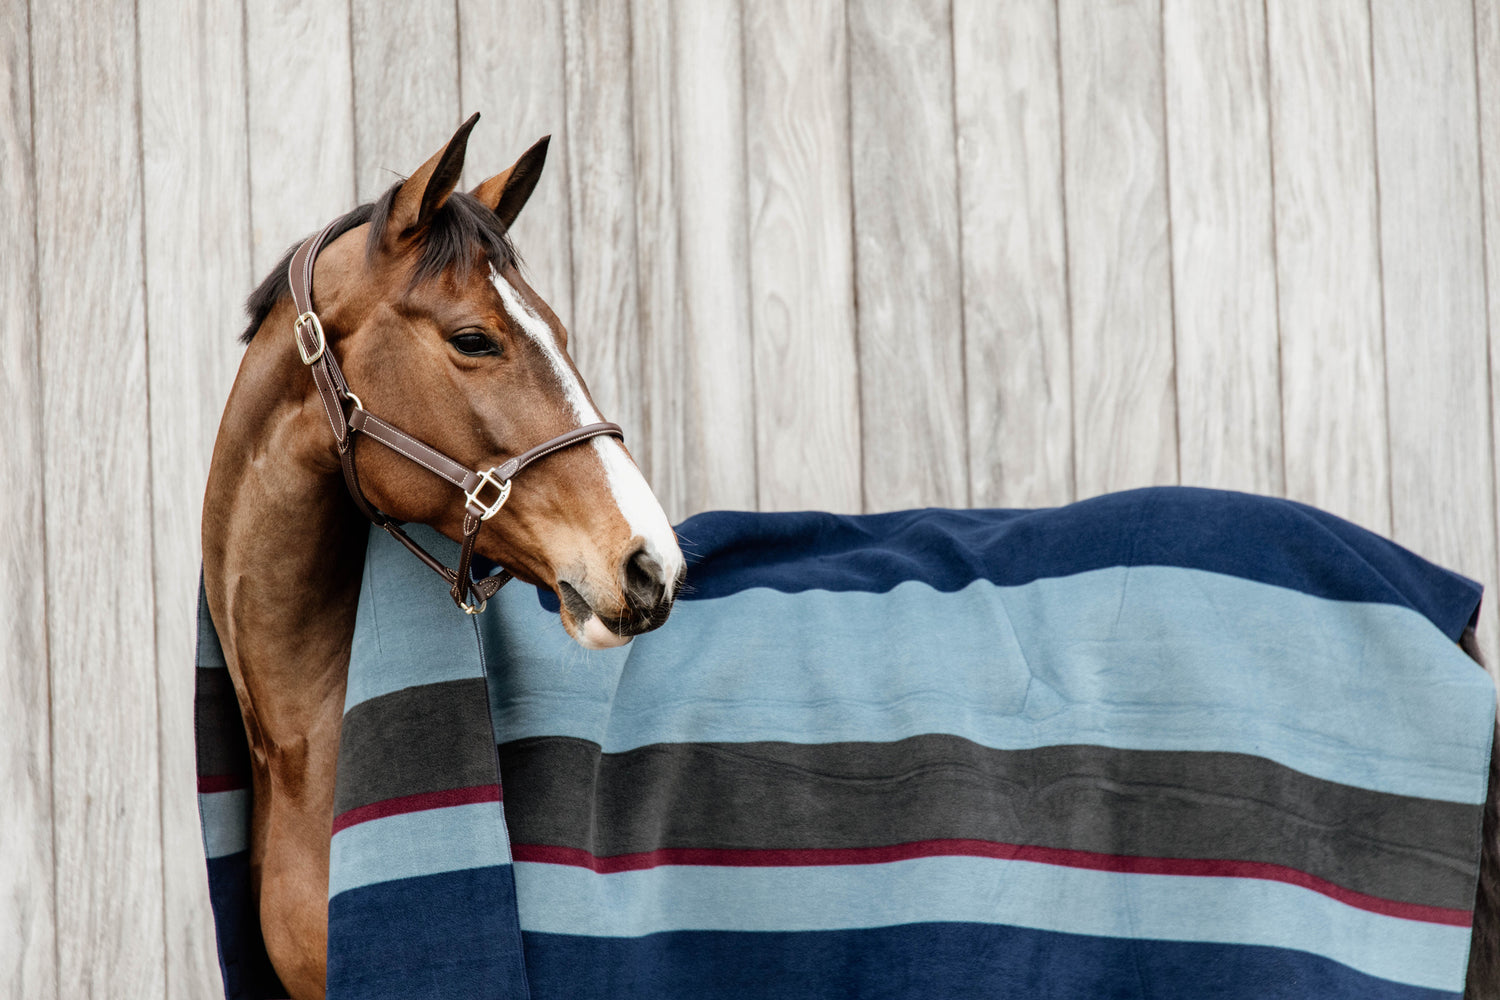 This Kentucky heavy fleece square rug is a great under layer, ring side or on the yard during the colder months. 